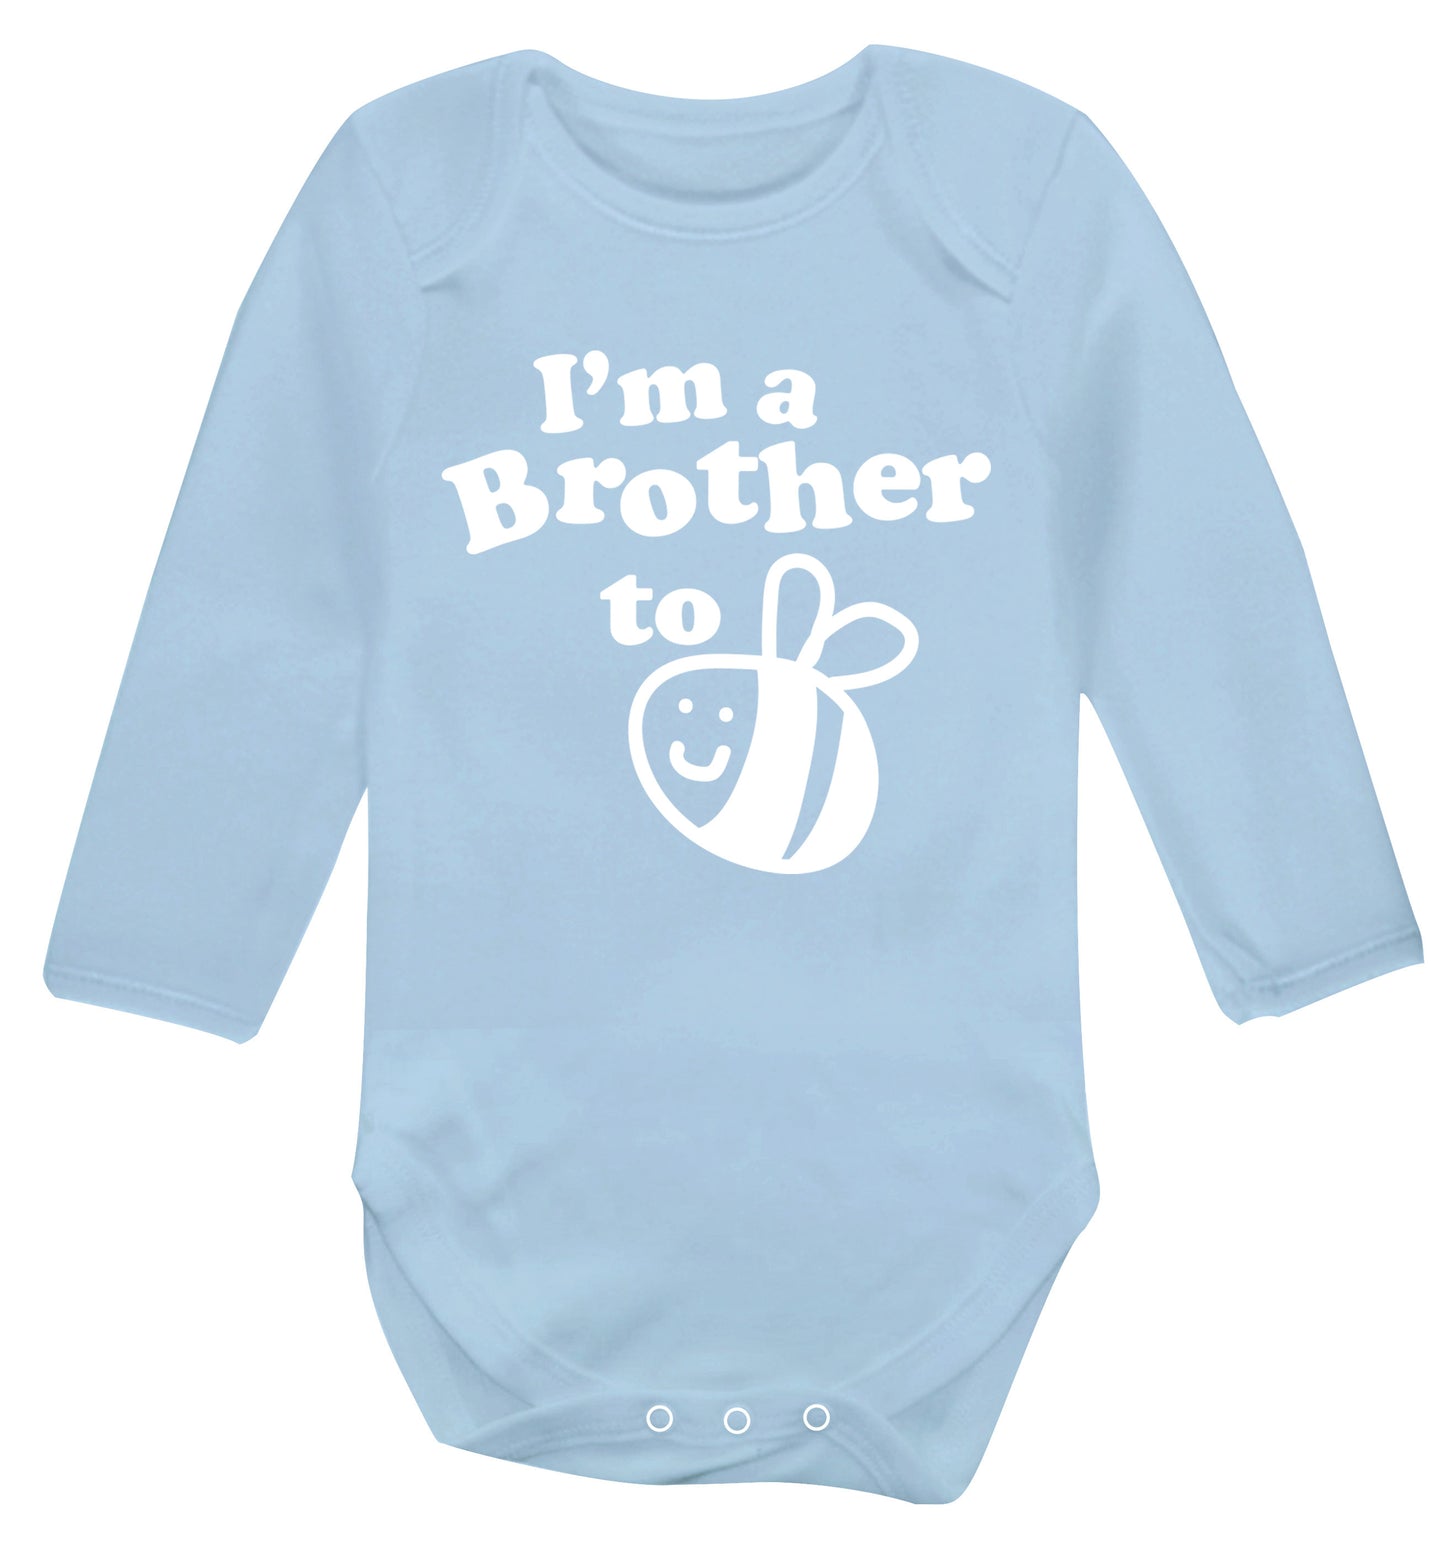 I'm a brother to be Baby Vest long sleeved pale blue 6-12 months